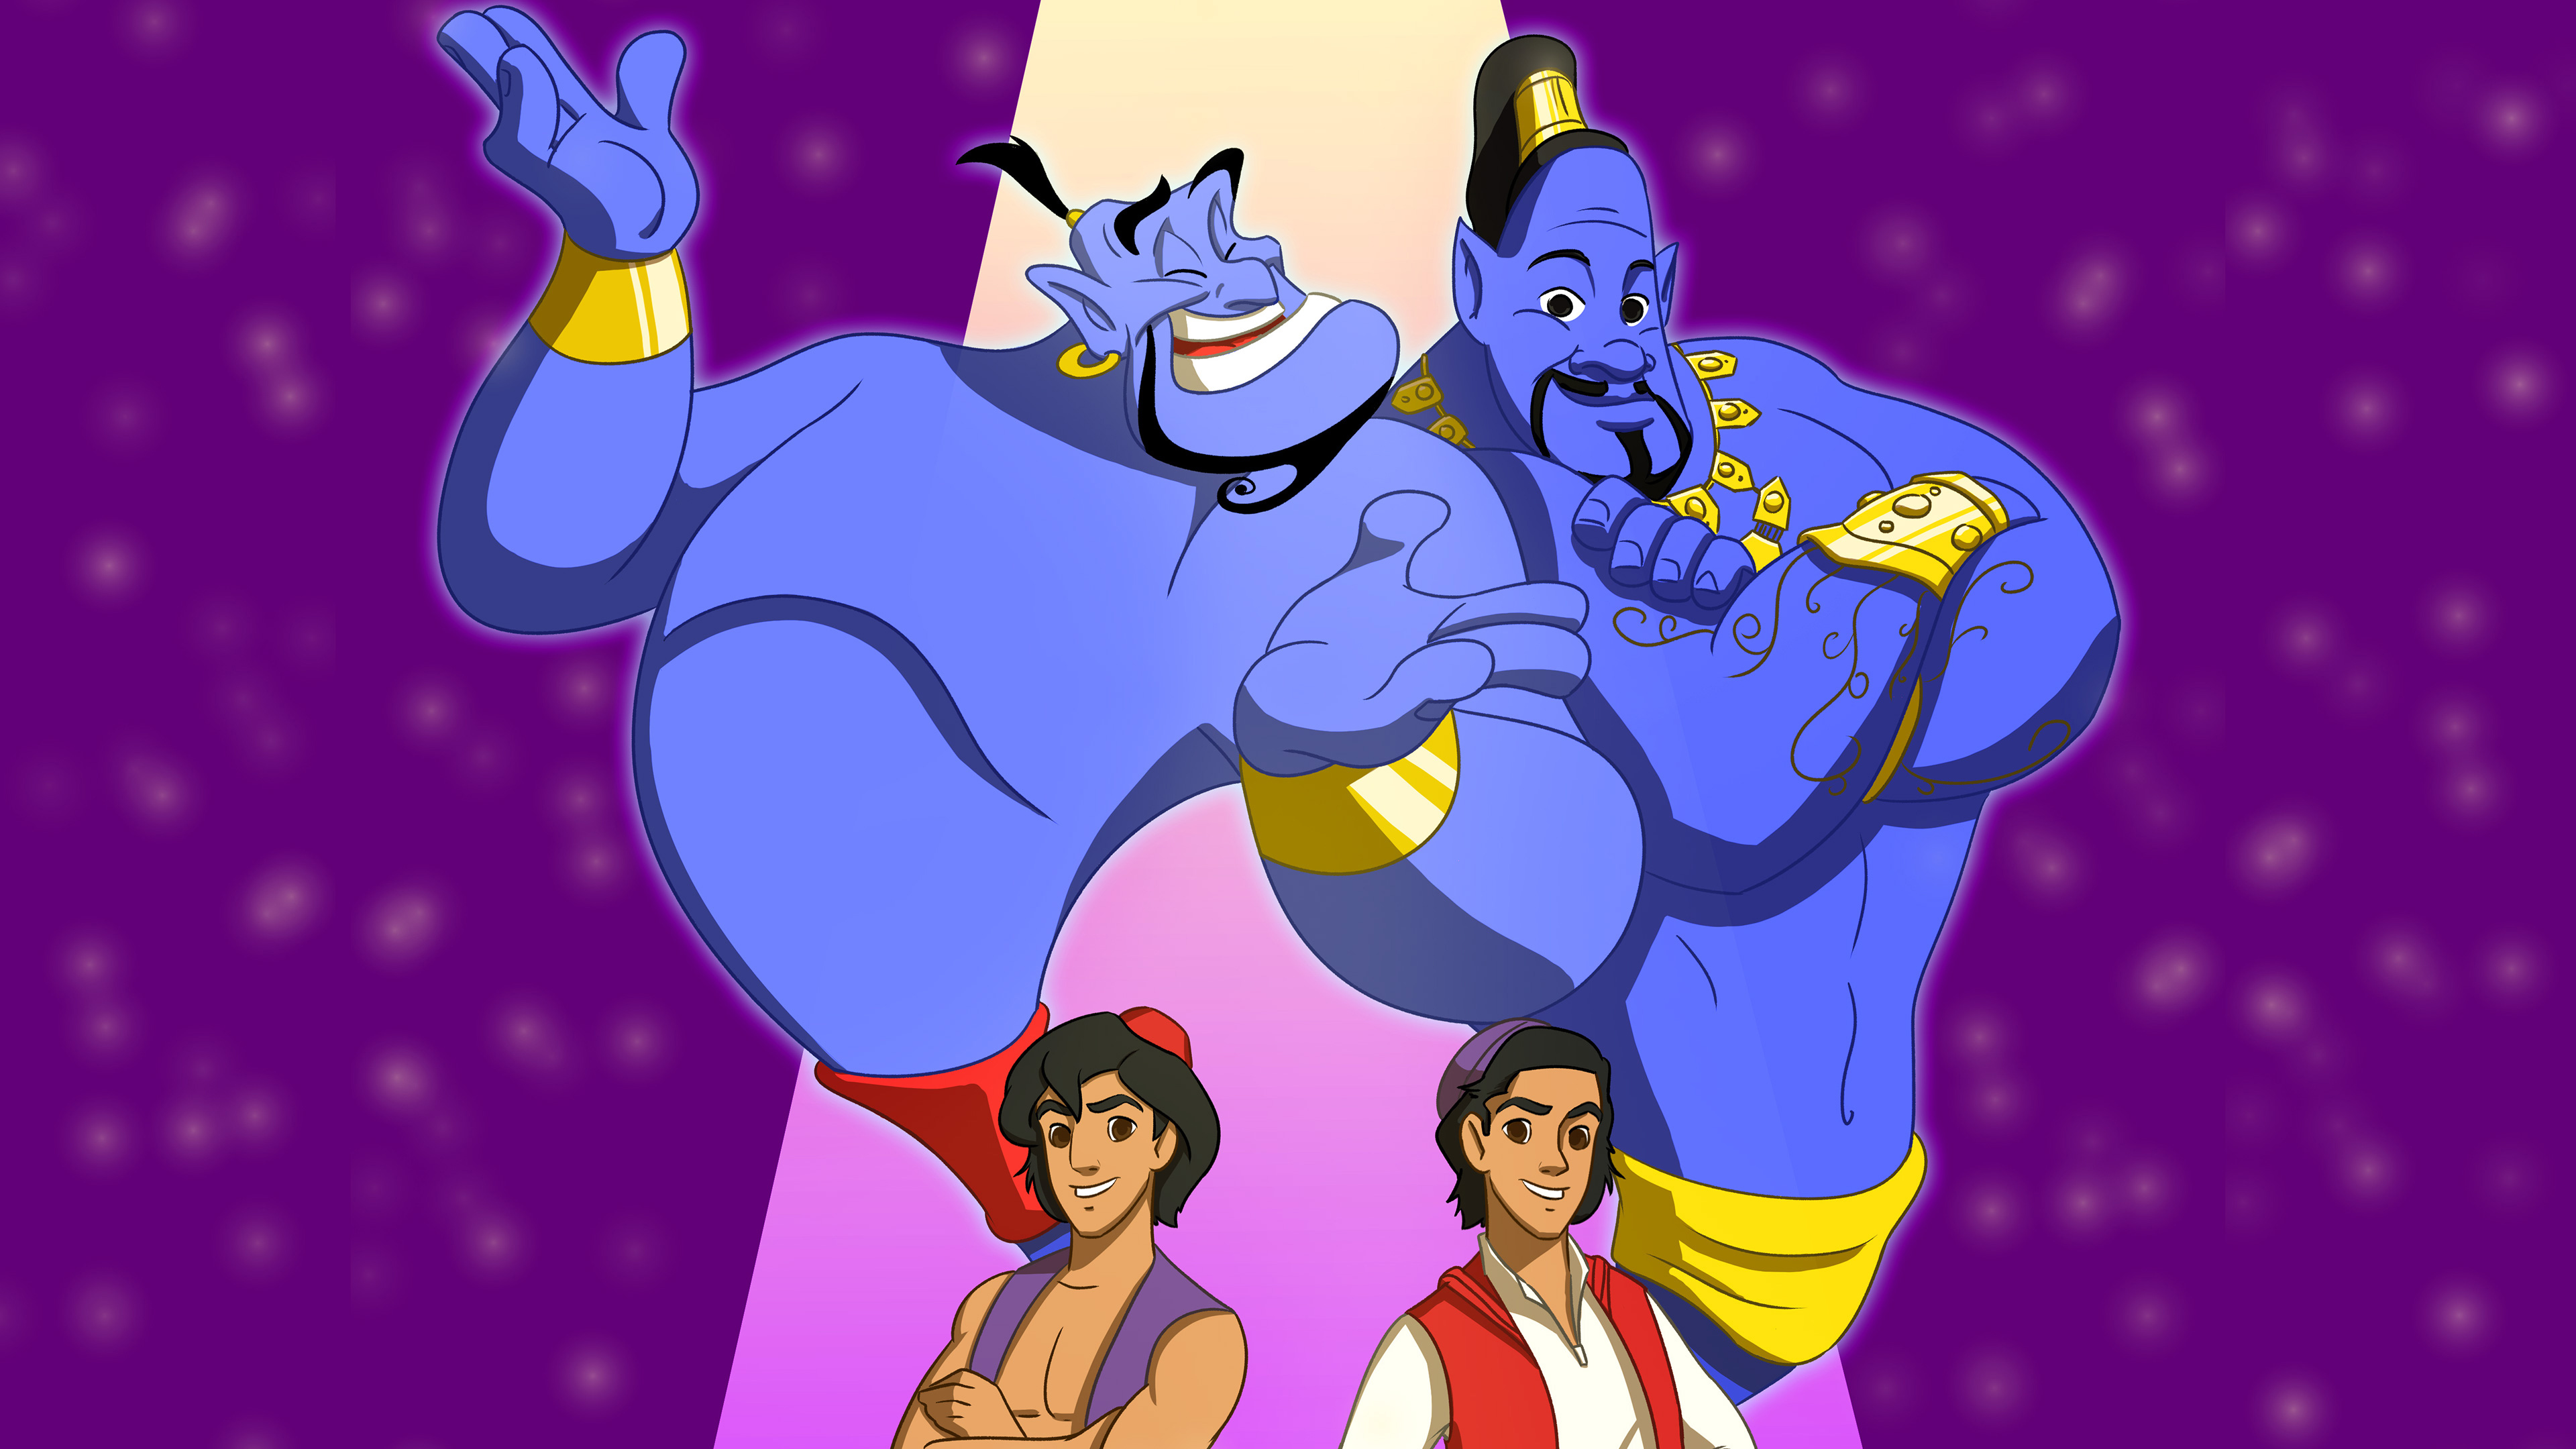 aladdin 2019 artwork 1560535153 - Aladdin 2019 Artwork - will smith wallpapers, movies wallpapers, hd-wallpapers, behance wallpapers, artwork wallpapers, aladdin wallpapers, aladdin movie wallpapers, 2019 movies wallpapers